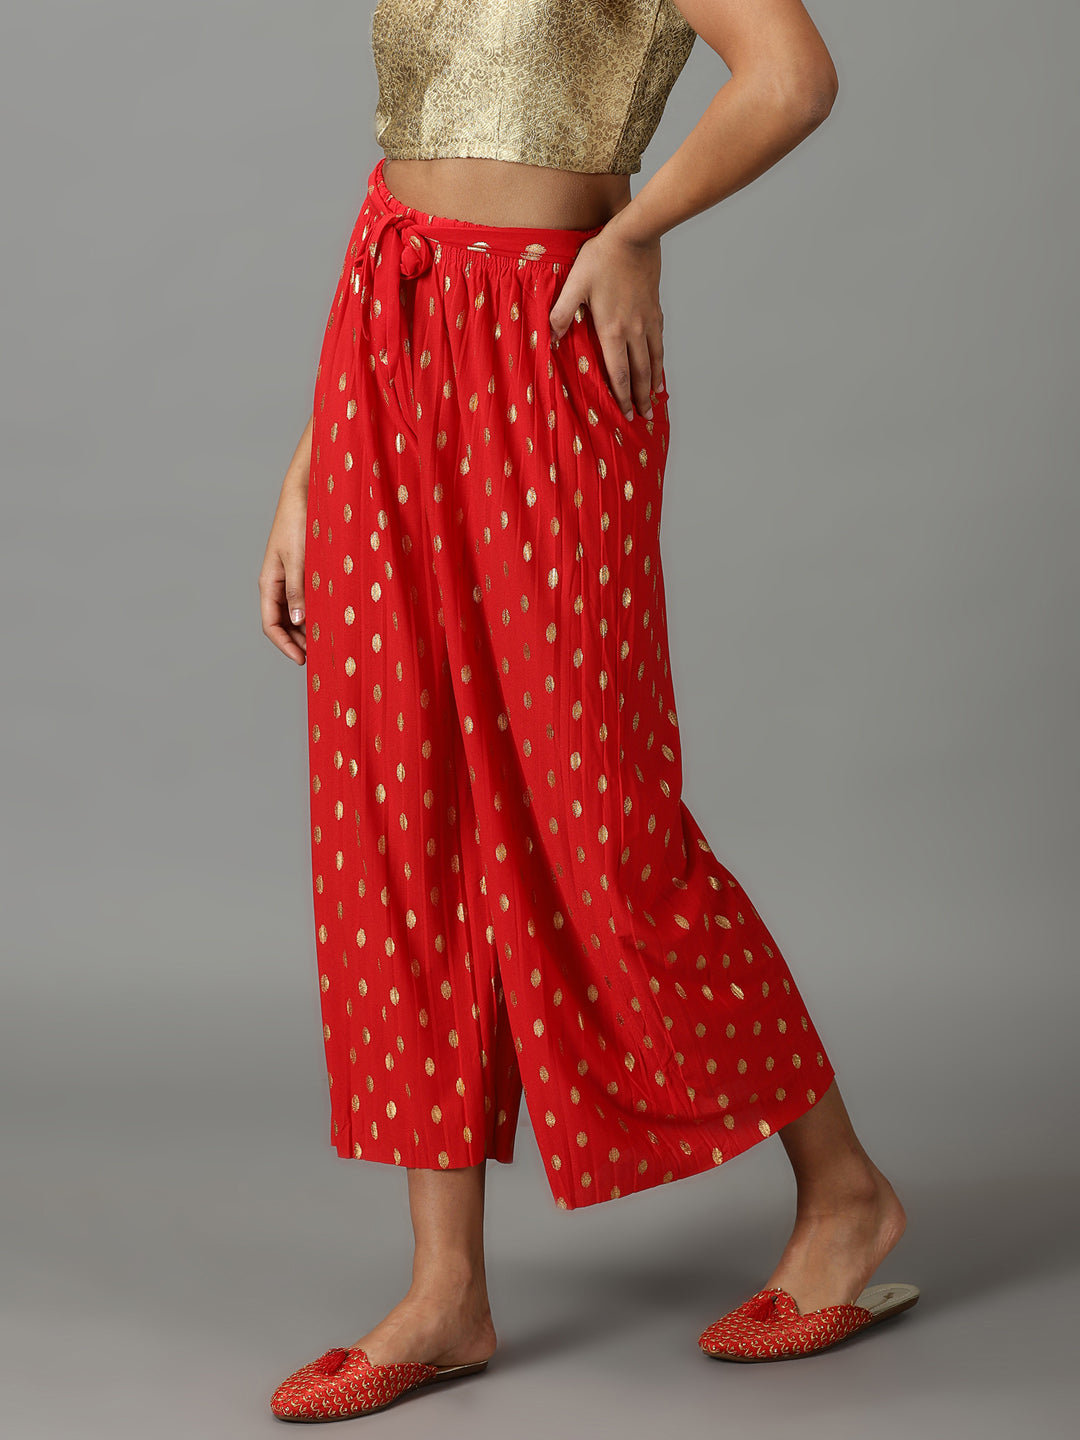 Women's Red Printed Parallel Trouser